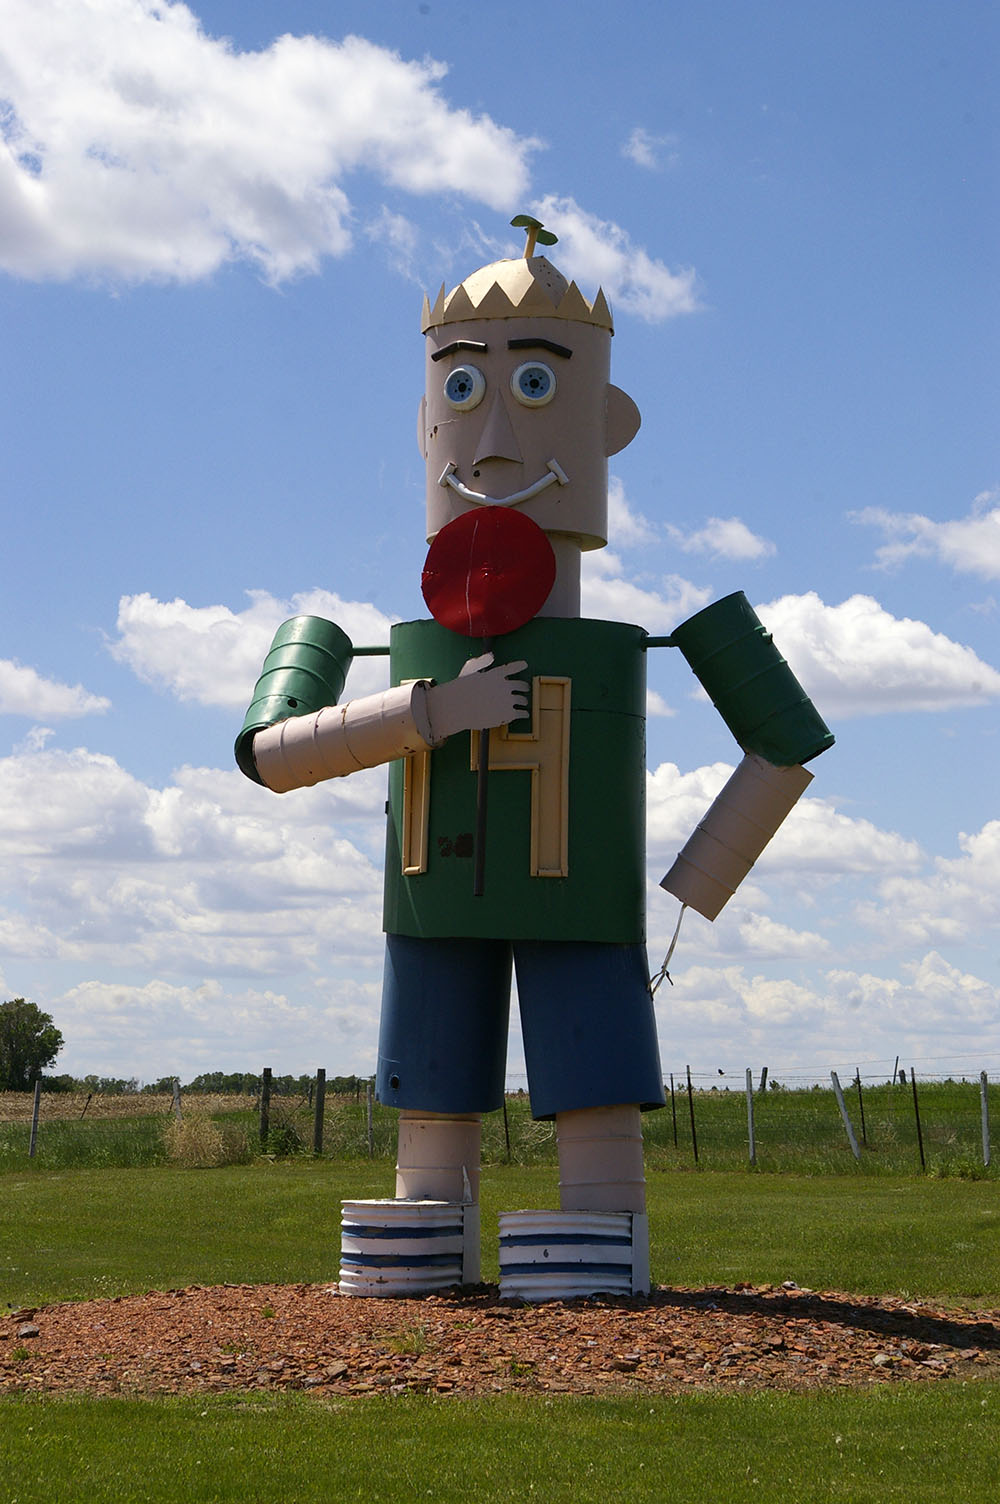 Large metal sculpture of a boy with a propellor hat licking a lollipop along the Enchanted Highway near Regent, North Dakota